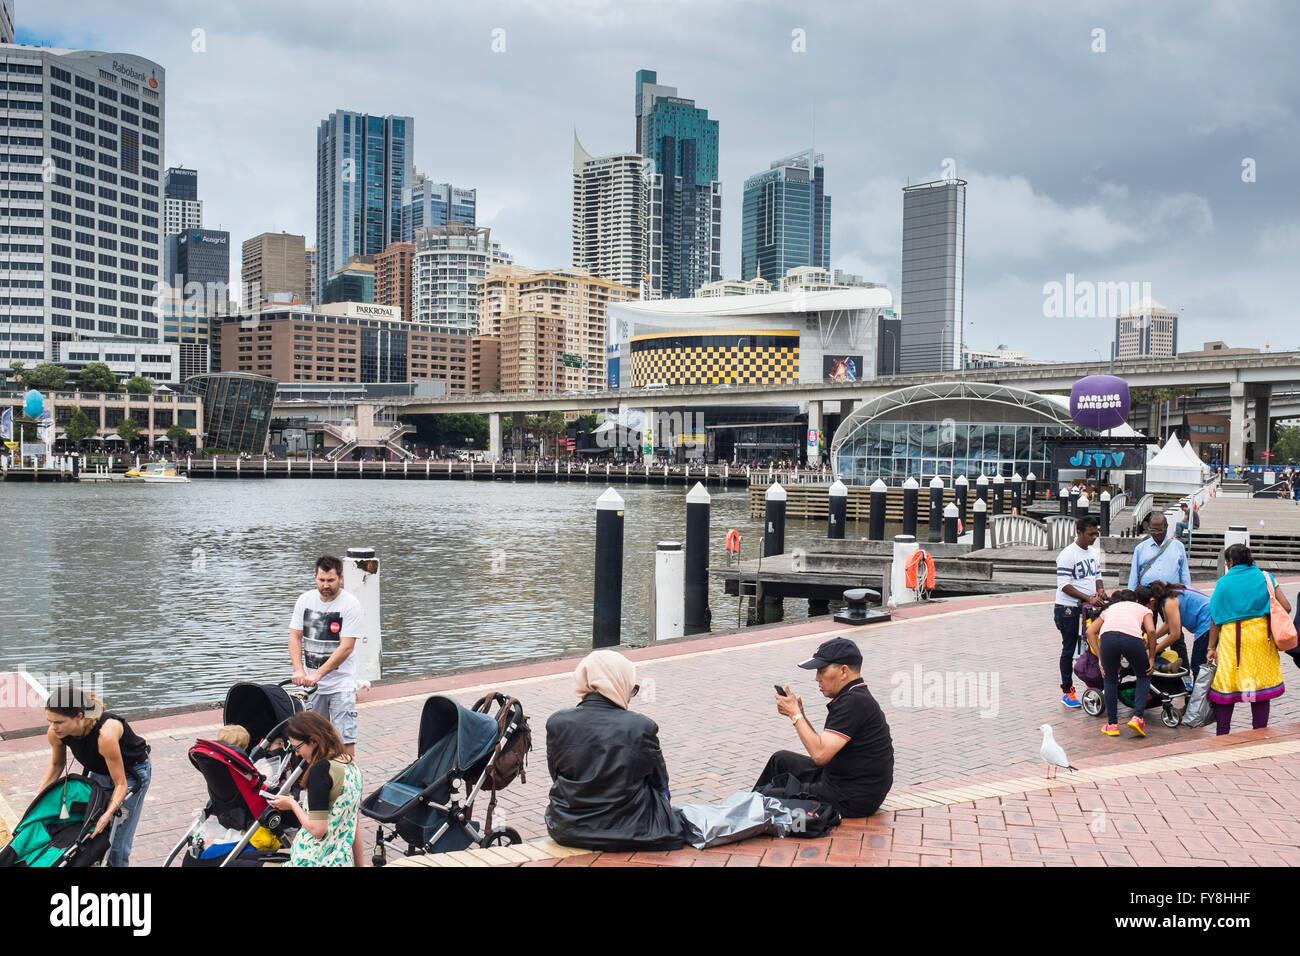 Darling Harbour, Sydney, New South Wales, Australia Stock Photo